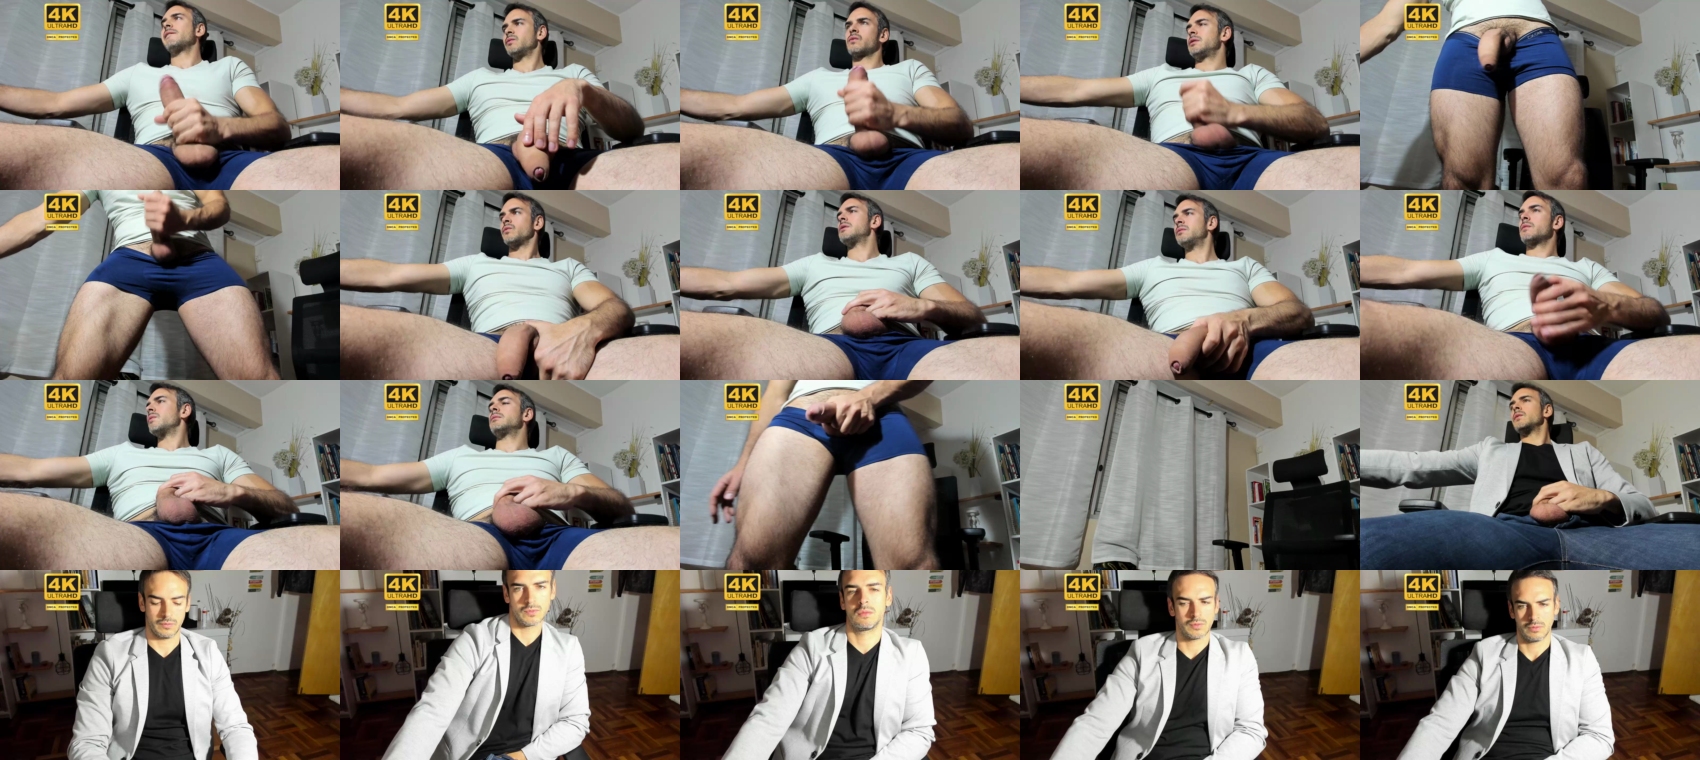 hot_martin25 sexykitty CAM SHOW @ Chaturbate 17-06-2022